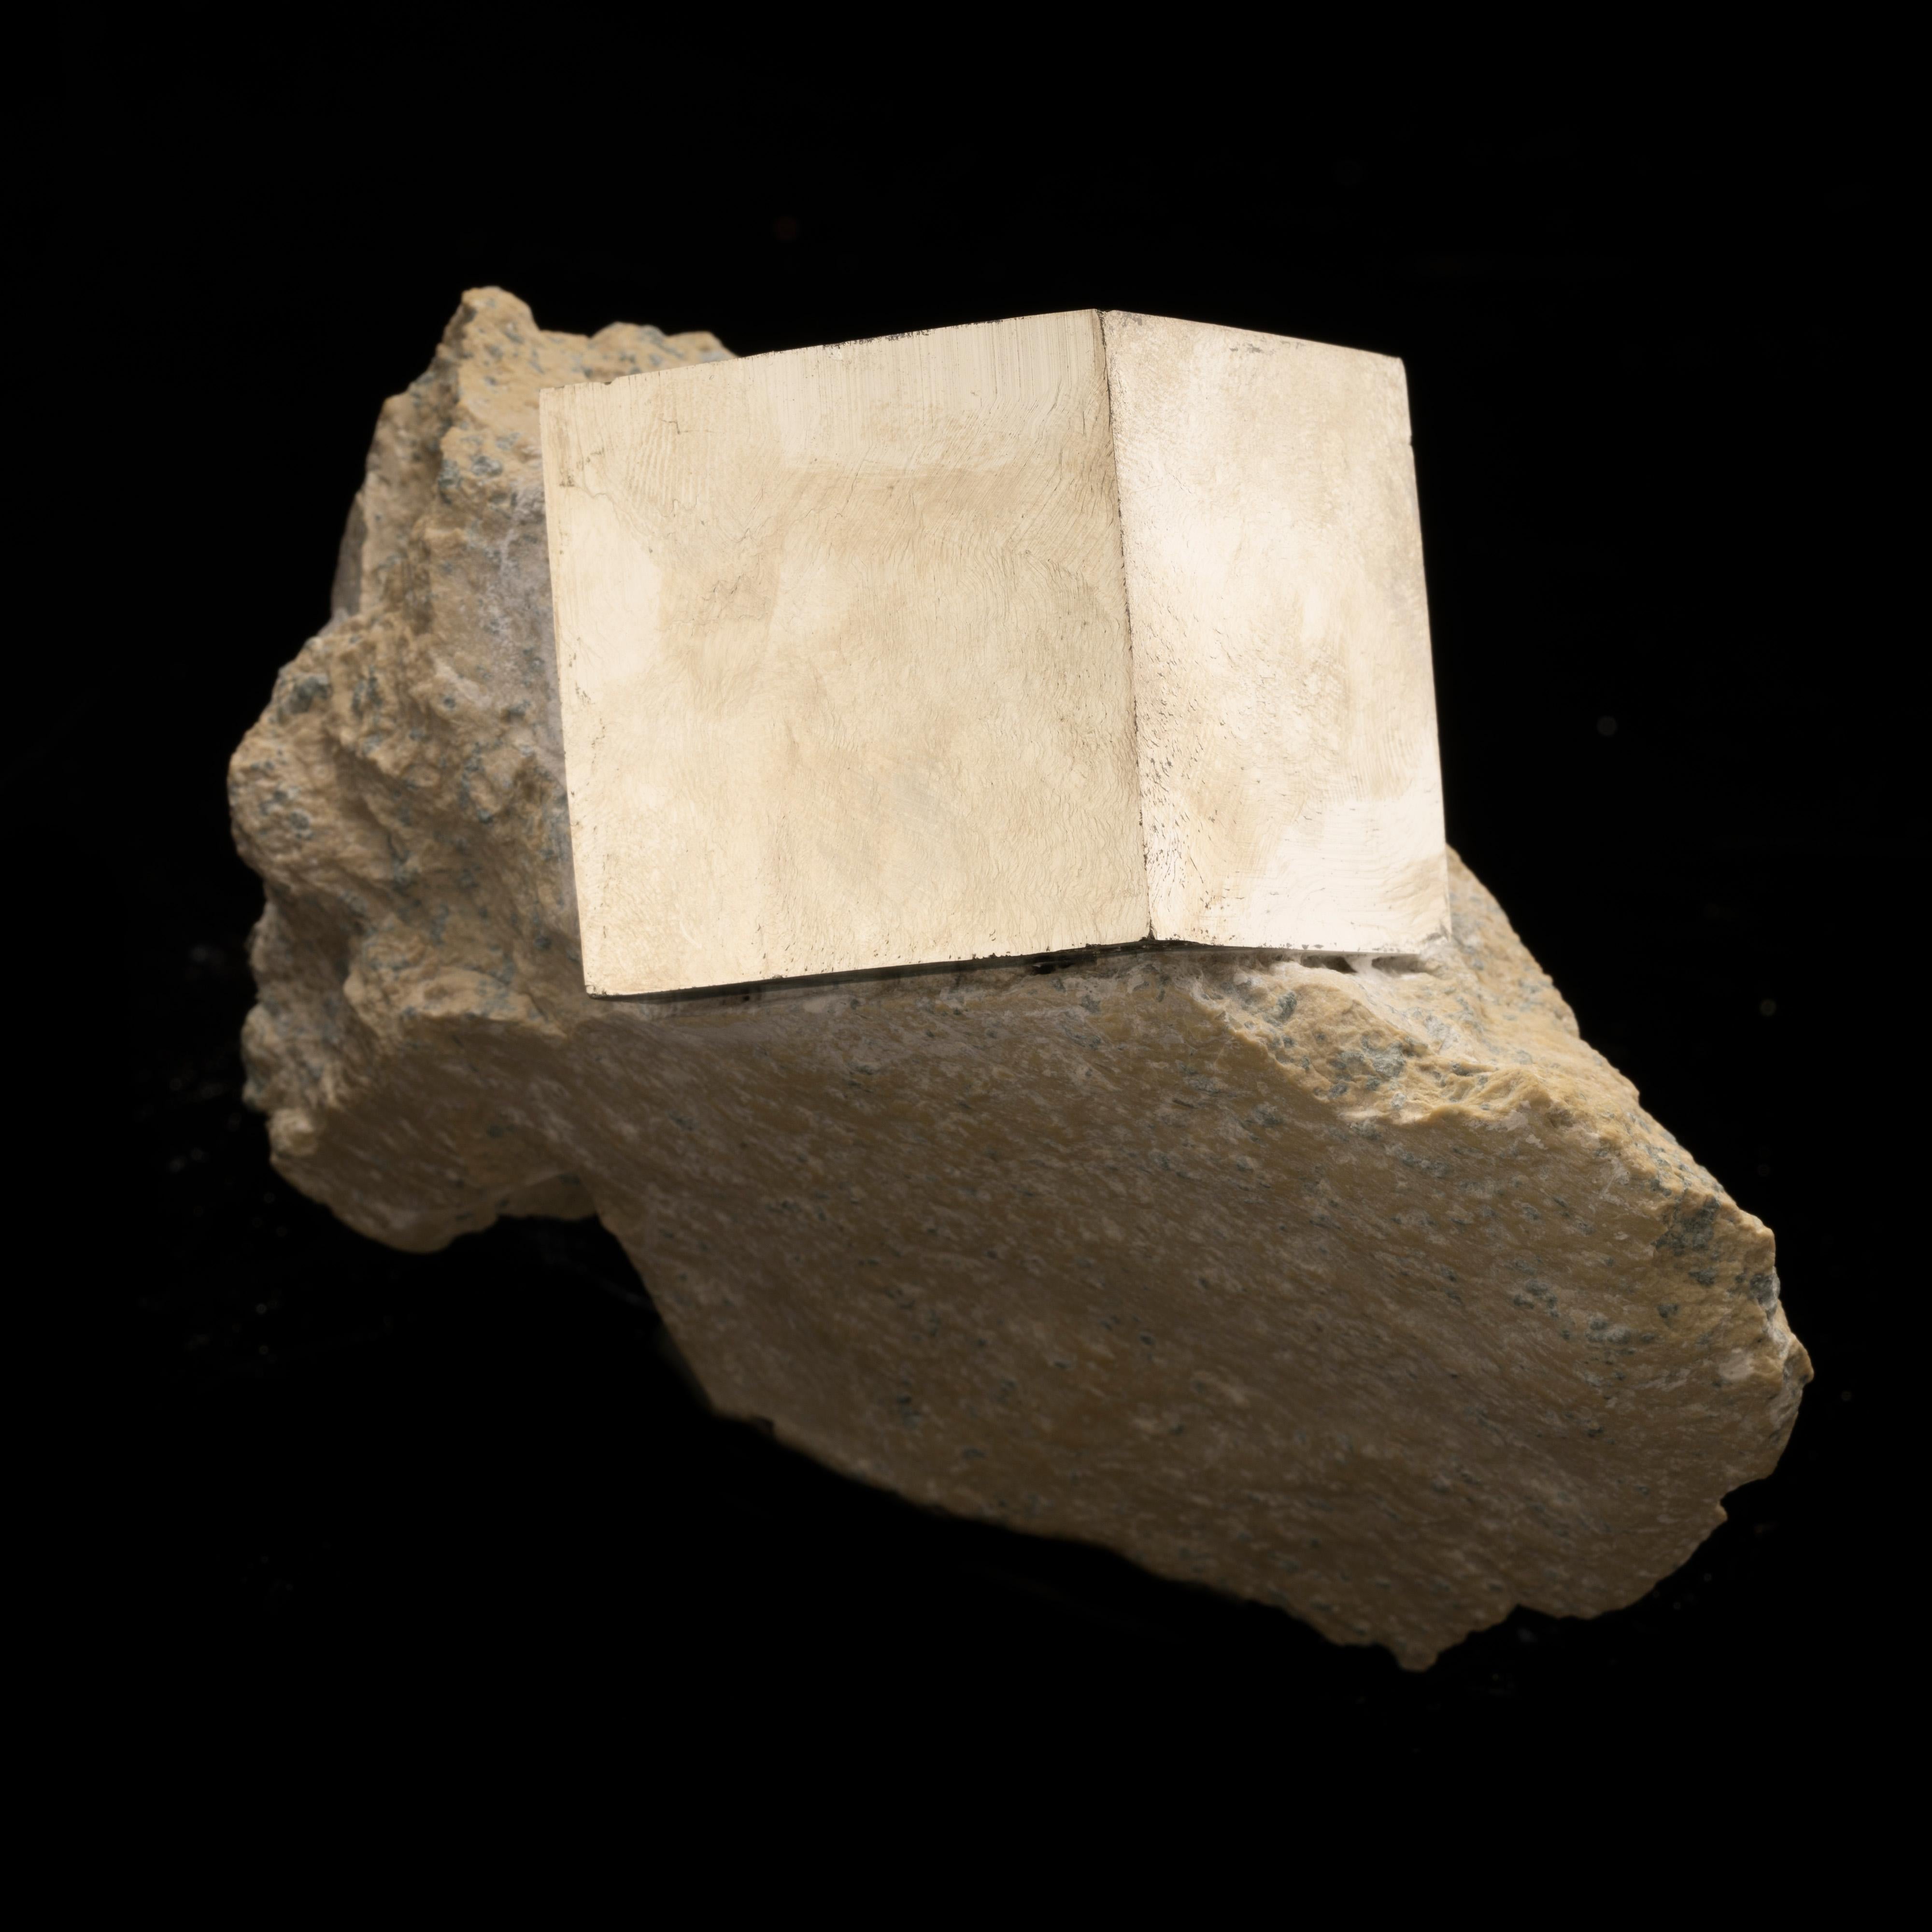 This astonishing 1.65 lb. specimen from Navajún, Spain features the rarity of a completely natural pyrite rectangle – measuring a substantial 1-5/8